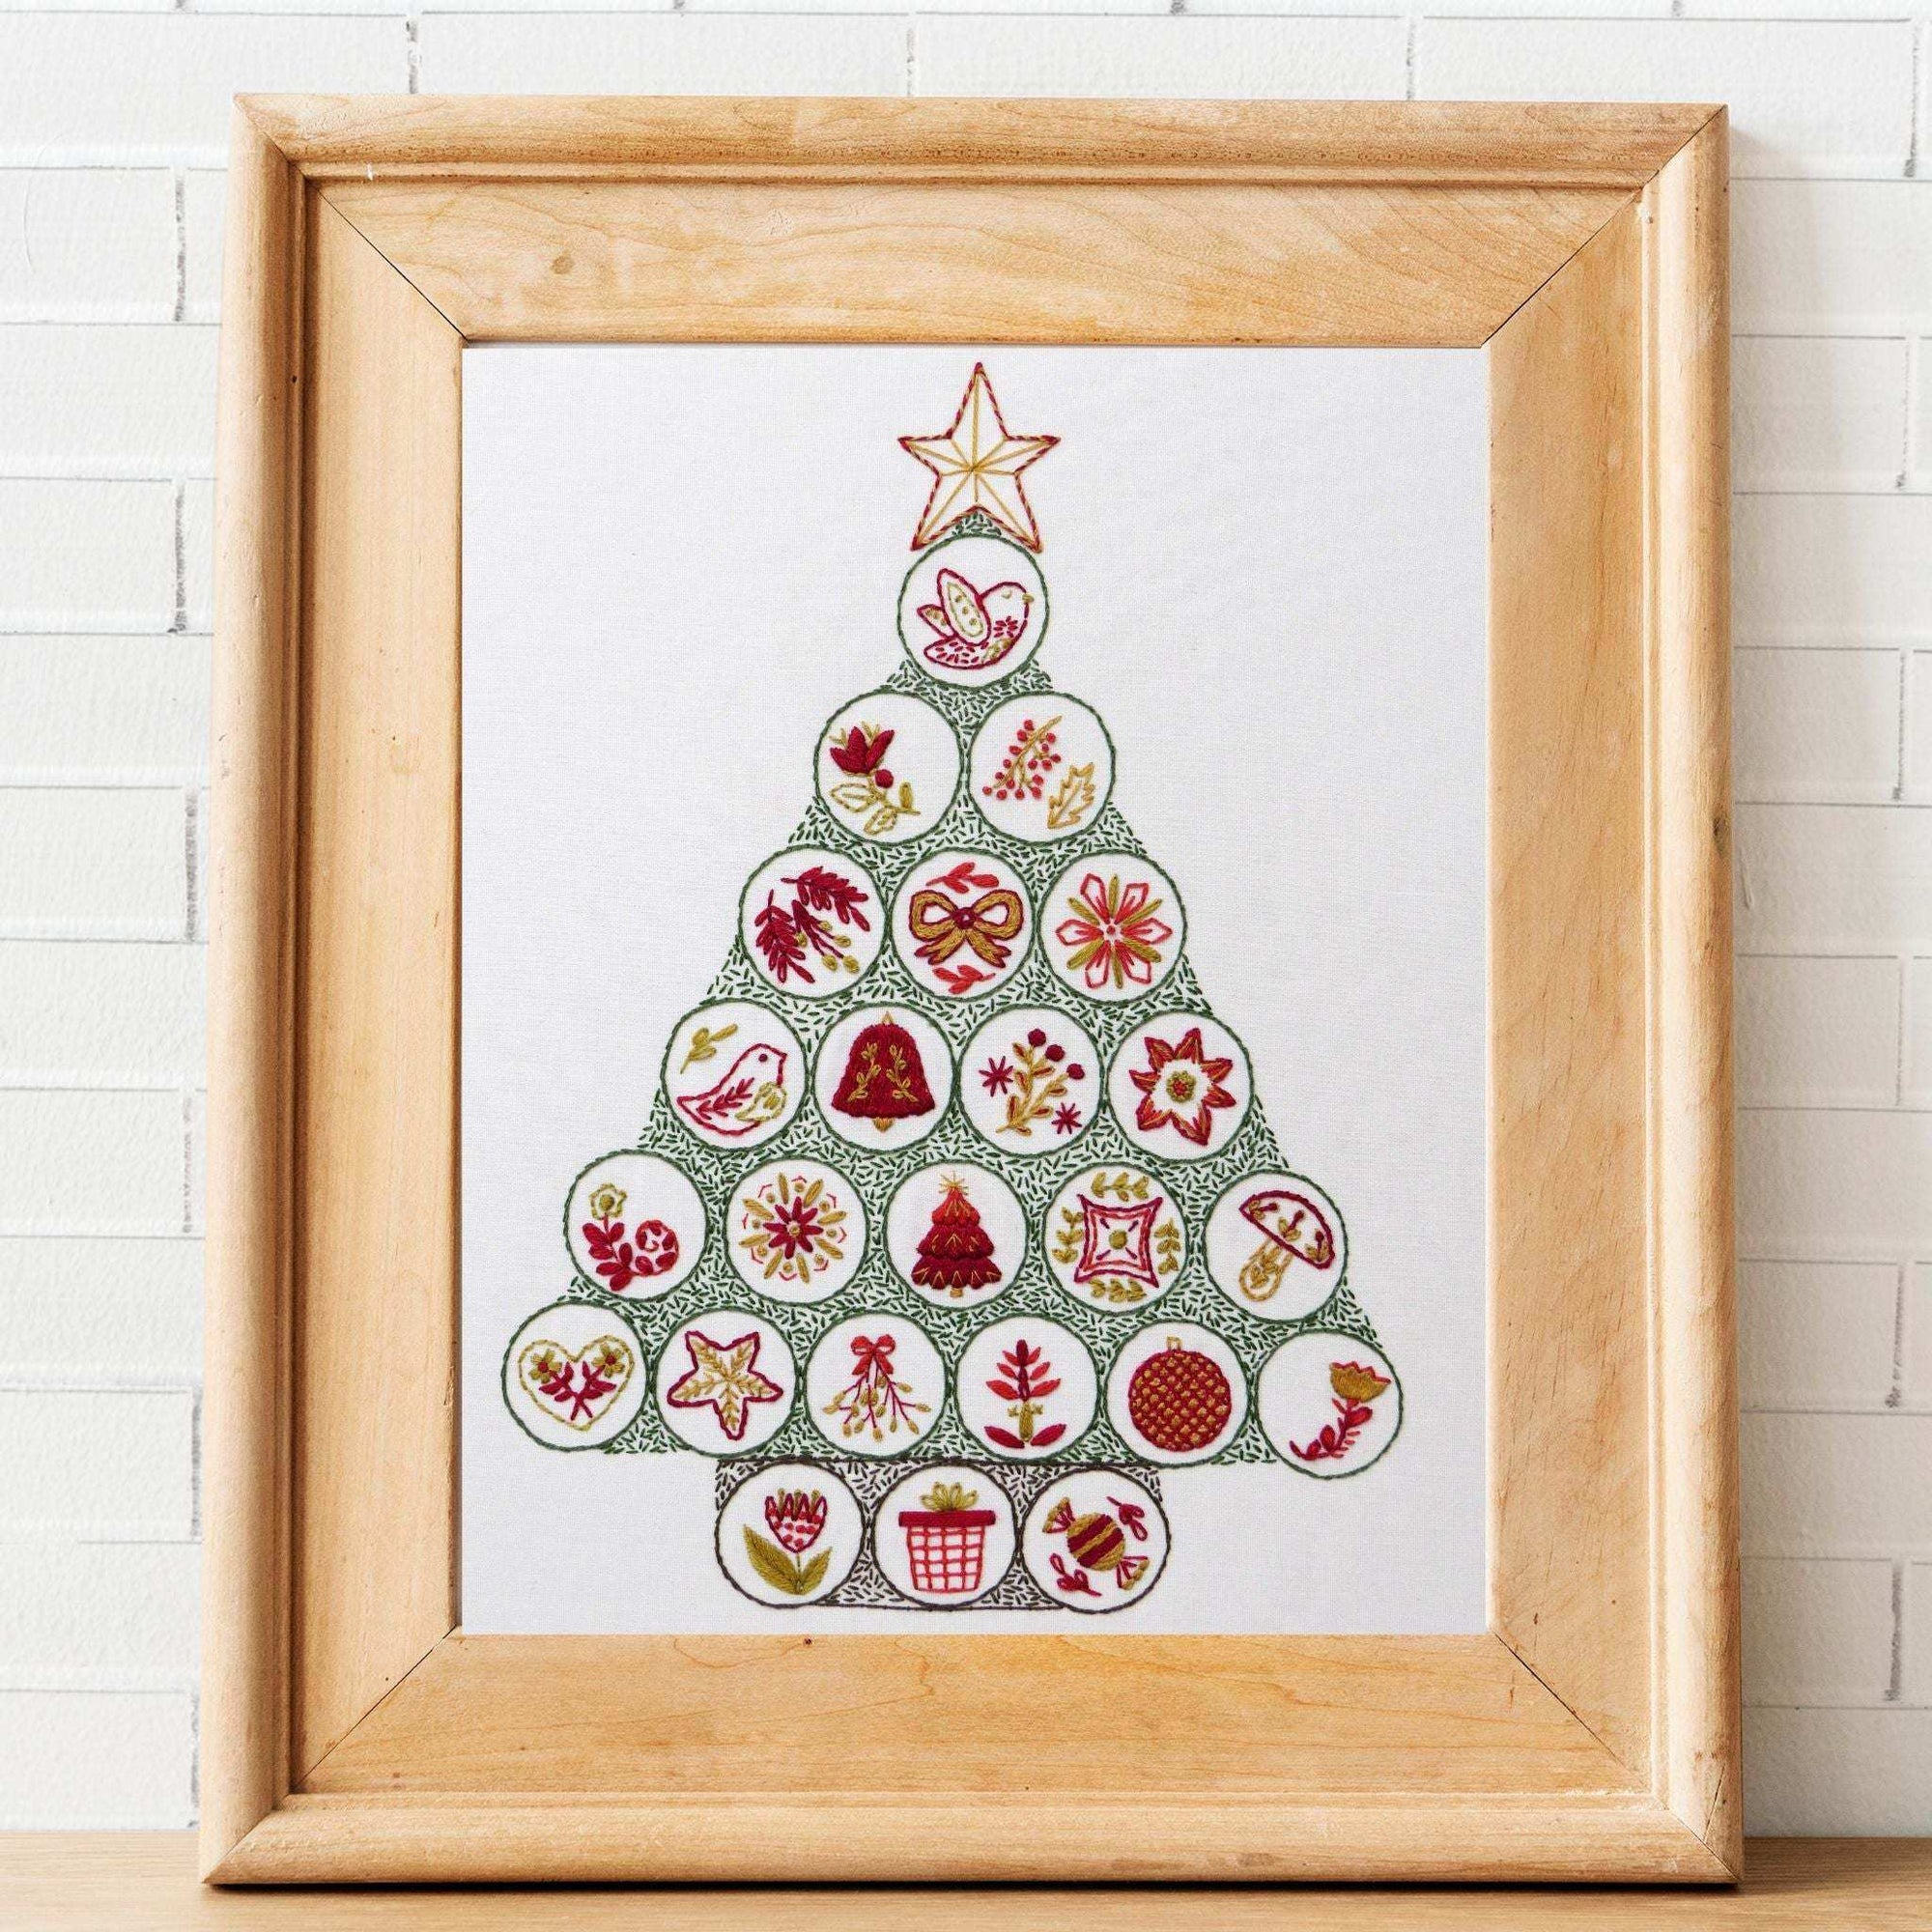 Christmas Folk Tree Advent Calendar Pre Printed Embroidery Fabric Panel , Pre Printed Fabric Pattern , StitchDoodles , christmas, embroidery hoop kit, Embroidery Kit, embroidery kit for adults, embroidery kit fro beginners, embroidery kits for adults, embroidery kits for beginners, hand embroidery fabric, modern embroidery kits , StitchDoodles , shop.stitchdoodles.com